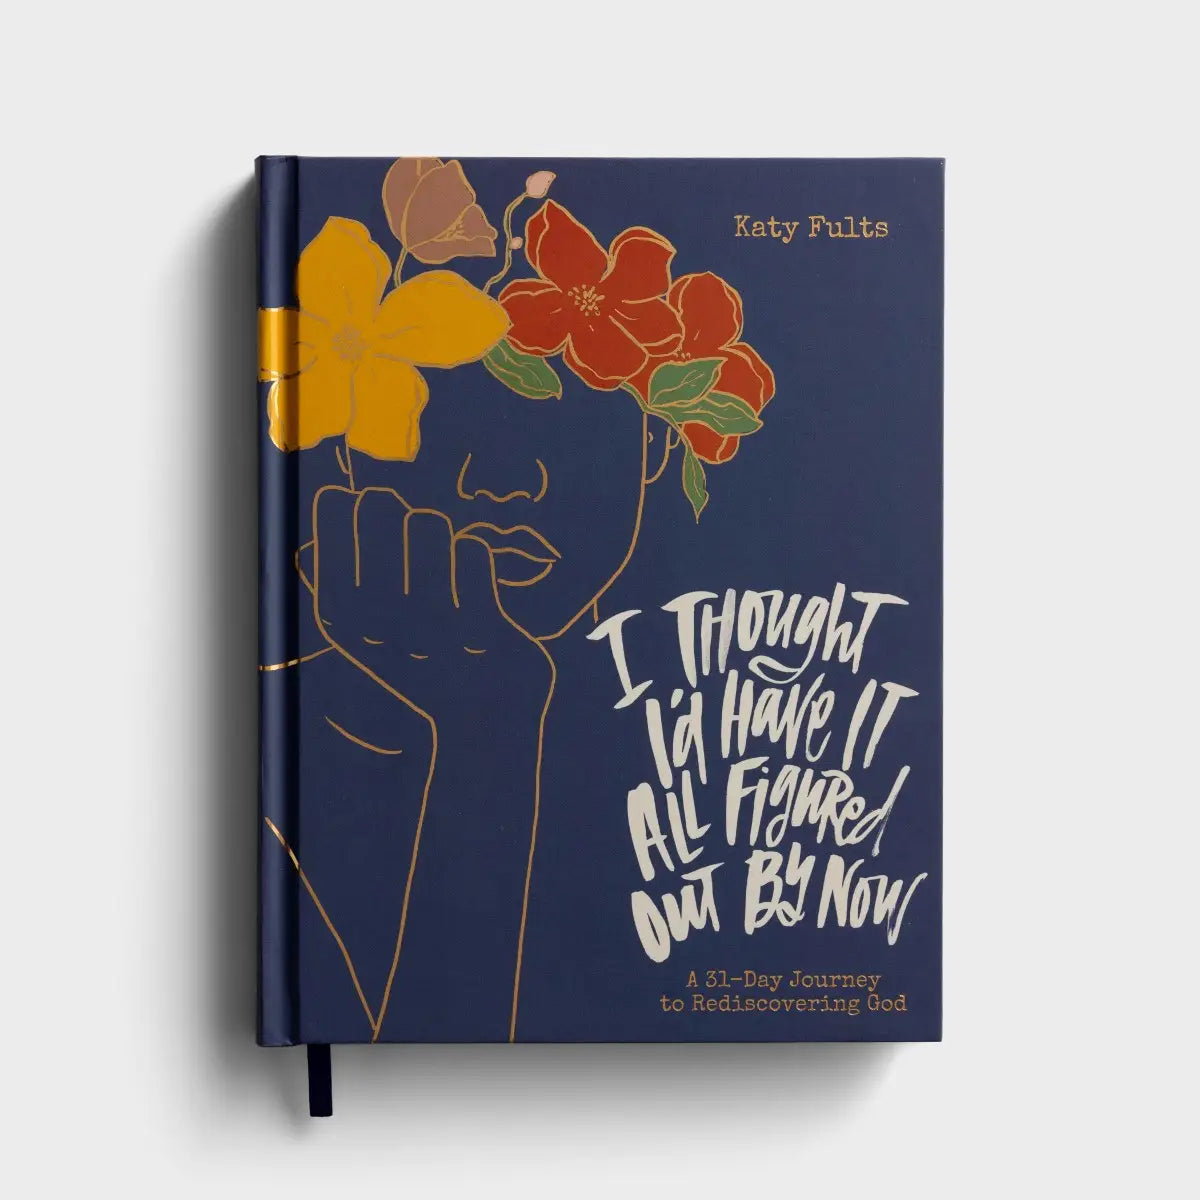 Katy Fults - I Thought I'd Have It All Figured Out by Now: A 31-day Journey to Rediscovering God